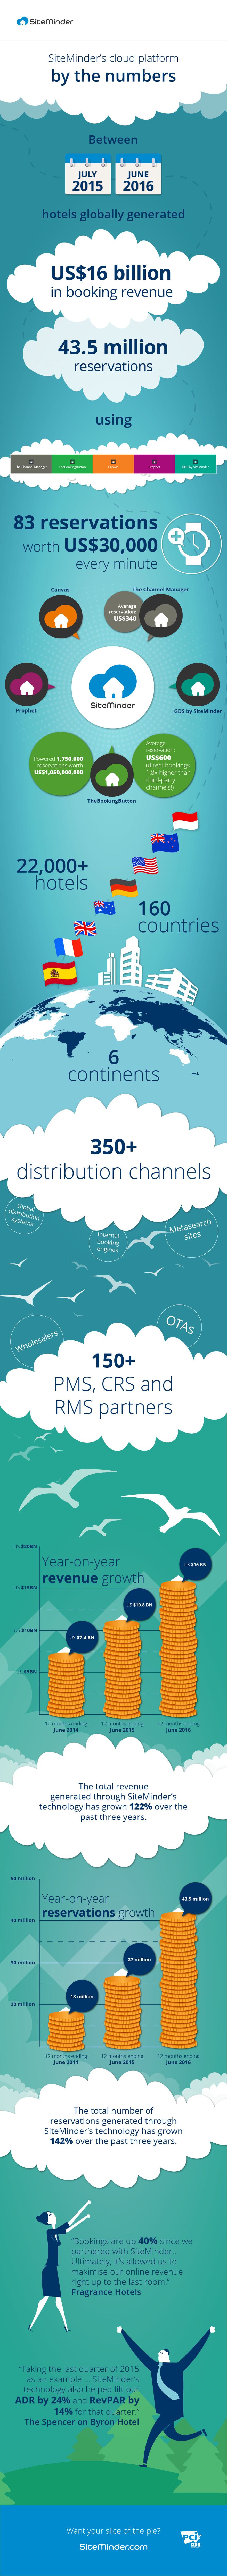 [INFOGRAPHIC] SiteMinder's cloud platform by the numbers